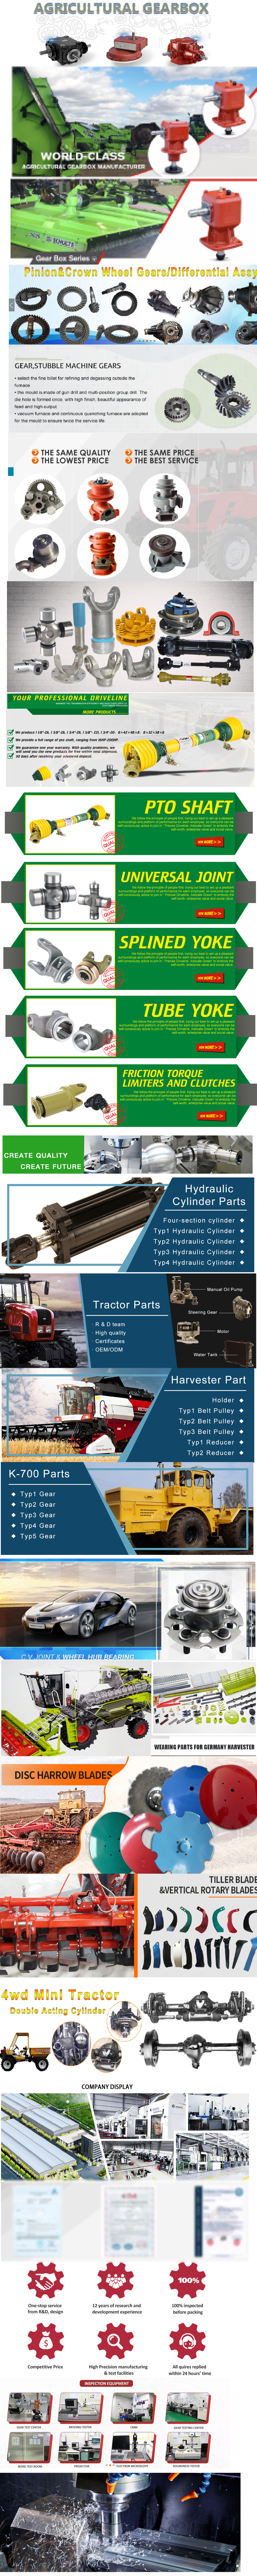 Agricultural  made in China - replacement parts -   power weeder gearbox   Lattakia Syrian Arab Republic   Gearbox Farm Pto Right Angle Tractor Slasher Rotary Tiller PGA Feeder Mixer Earth Auger for Micro Tiller 90 Degree Reducer with ce certificate top quality low price